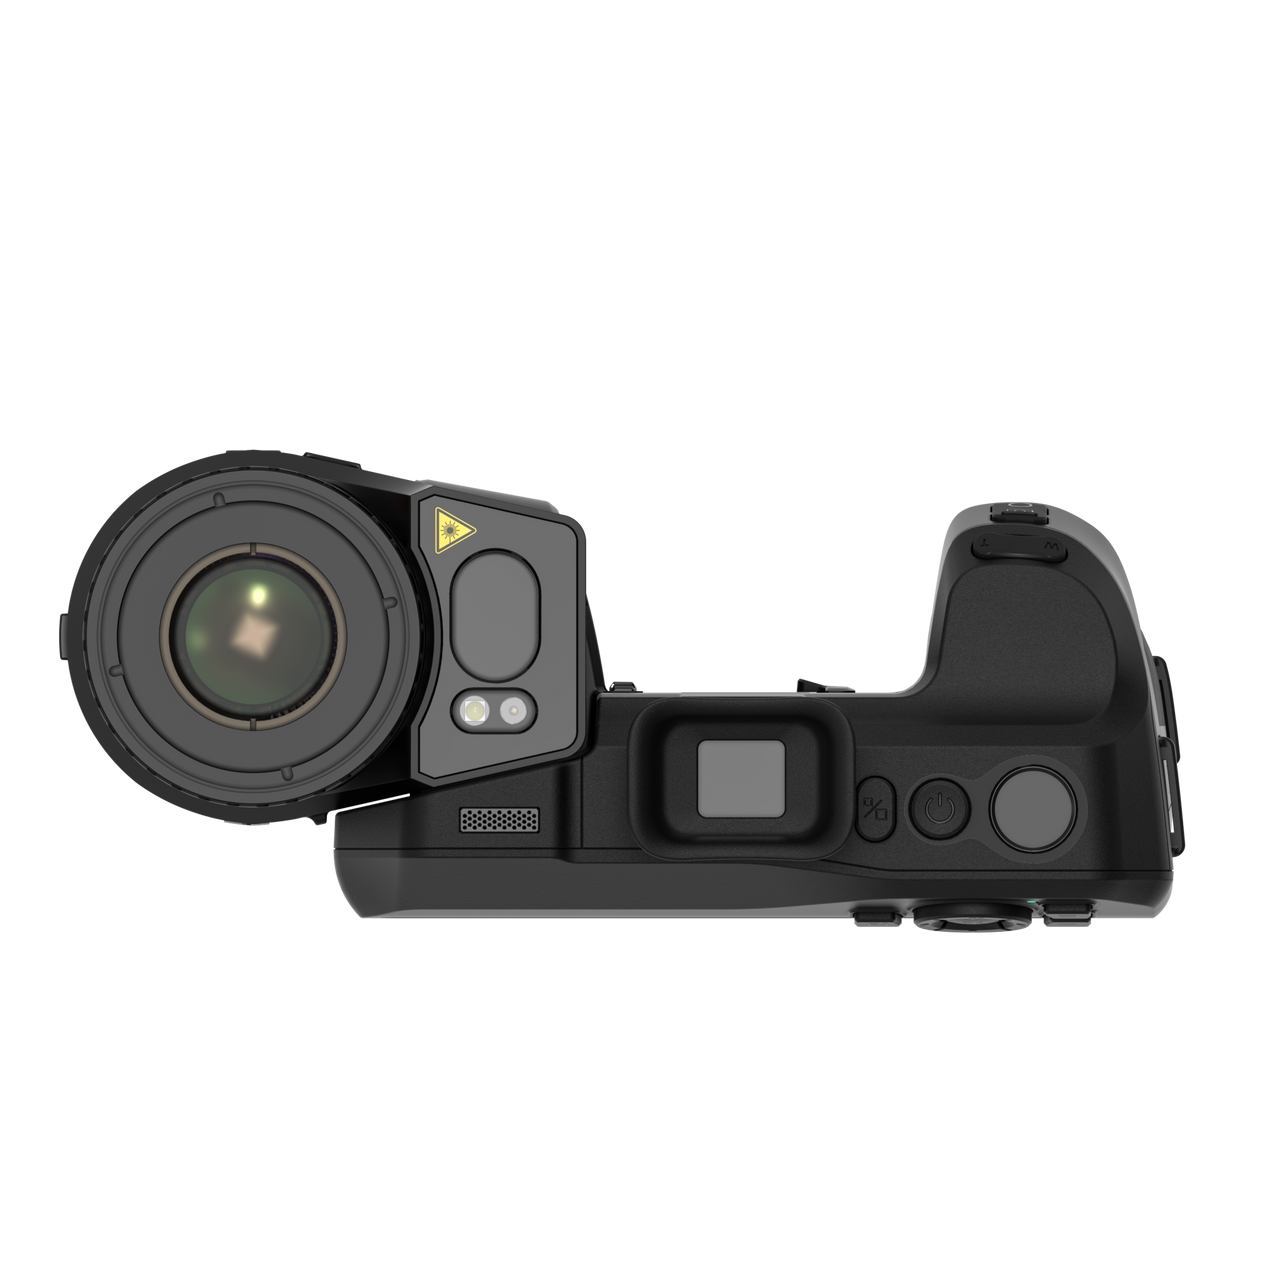 HIKMICRO SP60 Thermal Imaging Camera with 8 degree (3x), 12 degree (2x) and  25 degree (1x) Lenses, SP60-L8/12/25